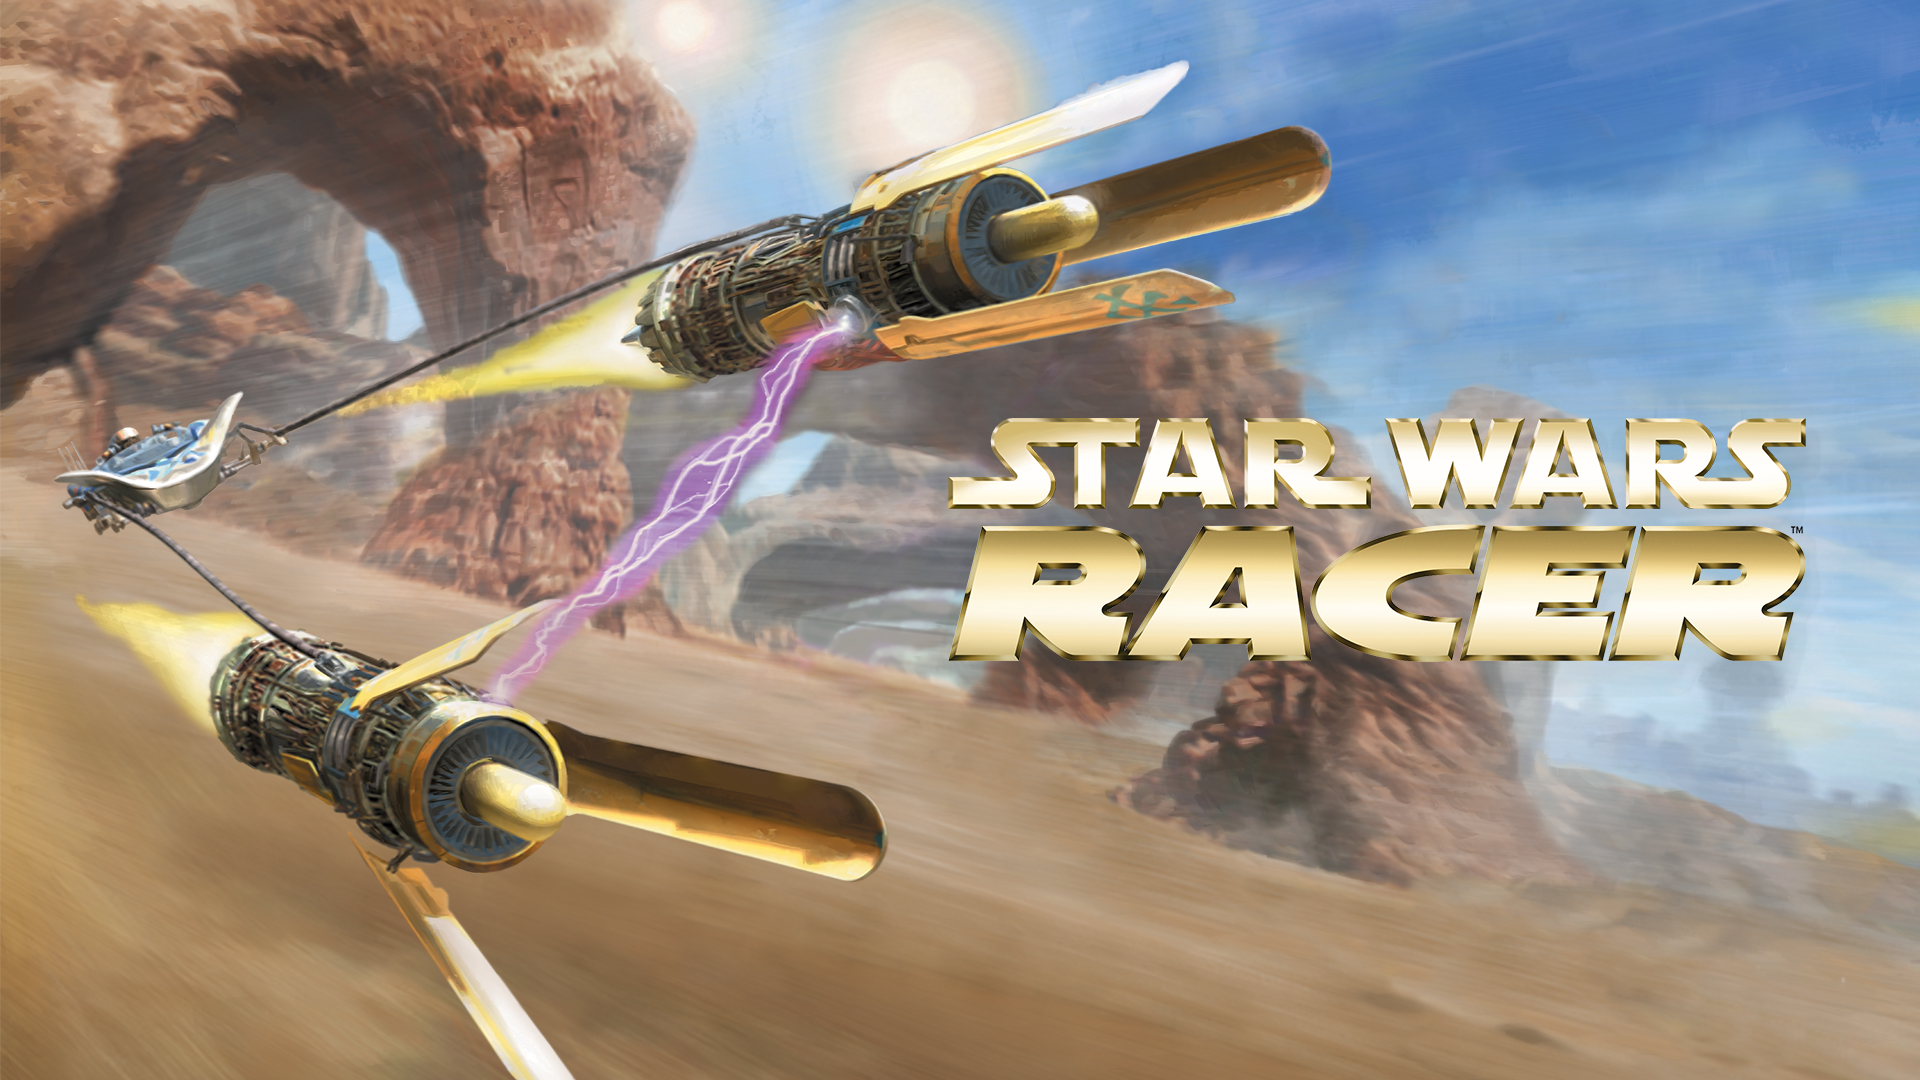 video game movie adaptations - Star Wars: Episode 1 Racer video game